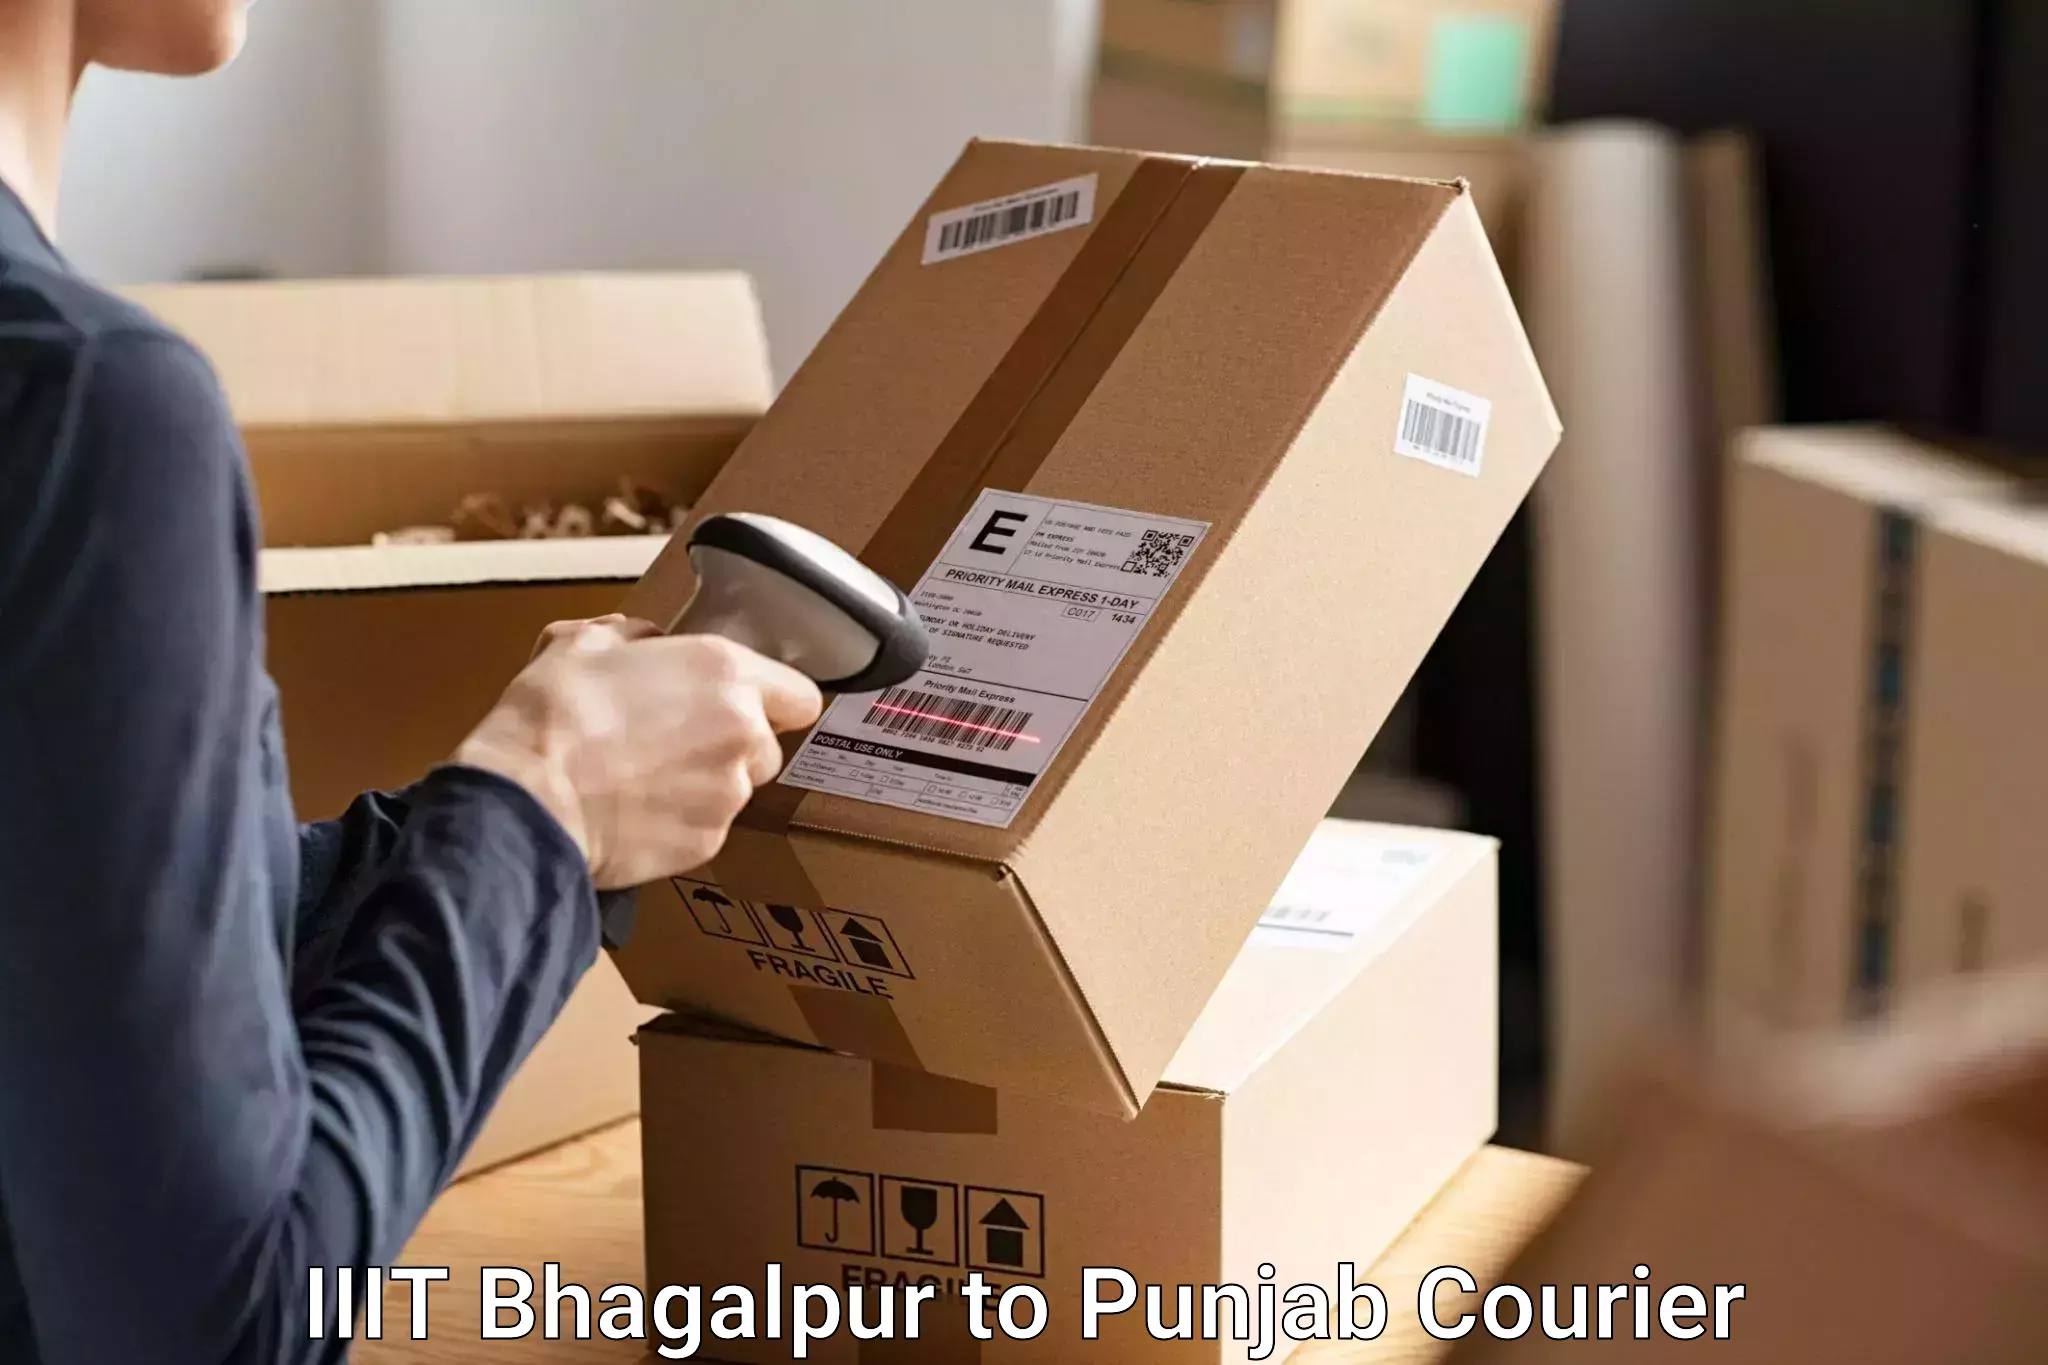 Luggage shipping guide IIIT Bhagalpur to Patiala